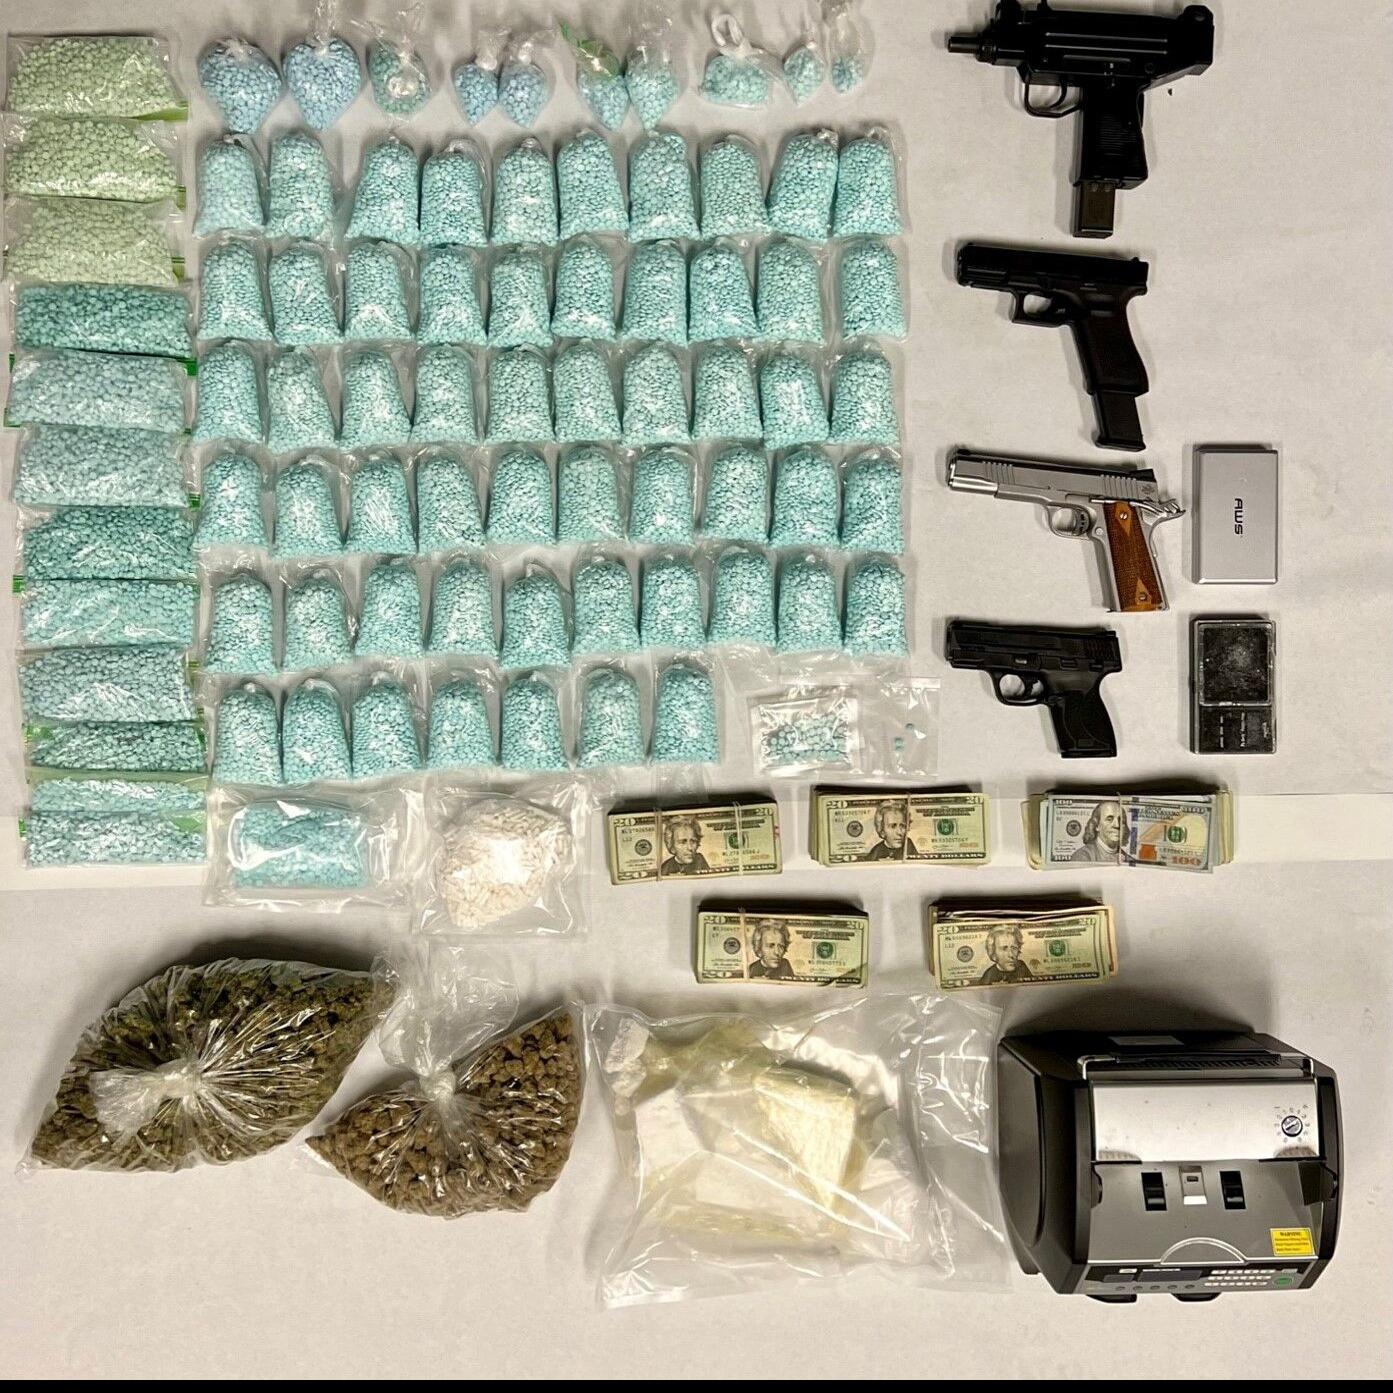 Massive drug bust in mid-Michigan leads to 6 arrests, narcotics and gun  seizures, and more